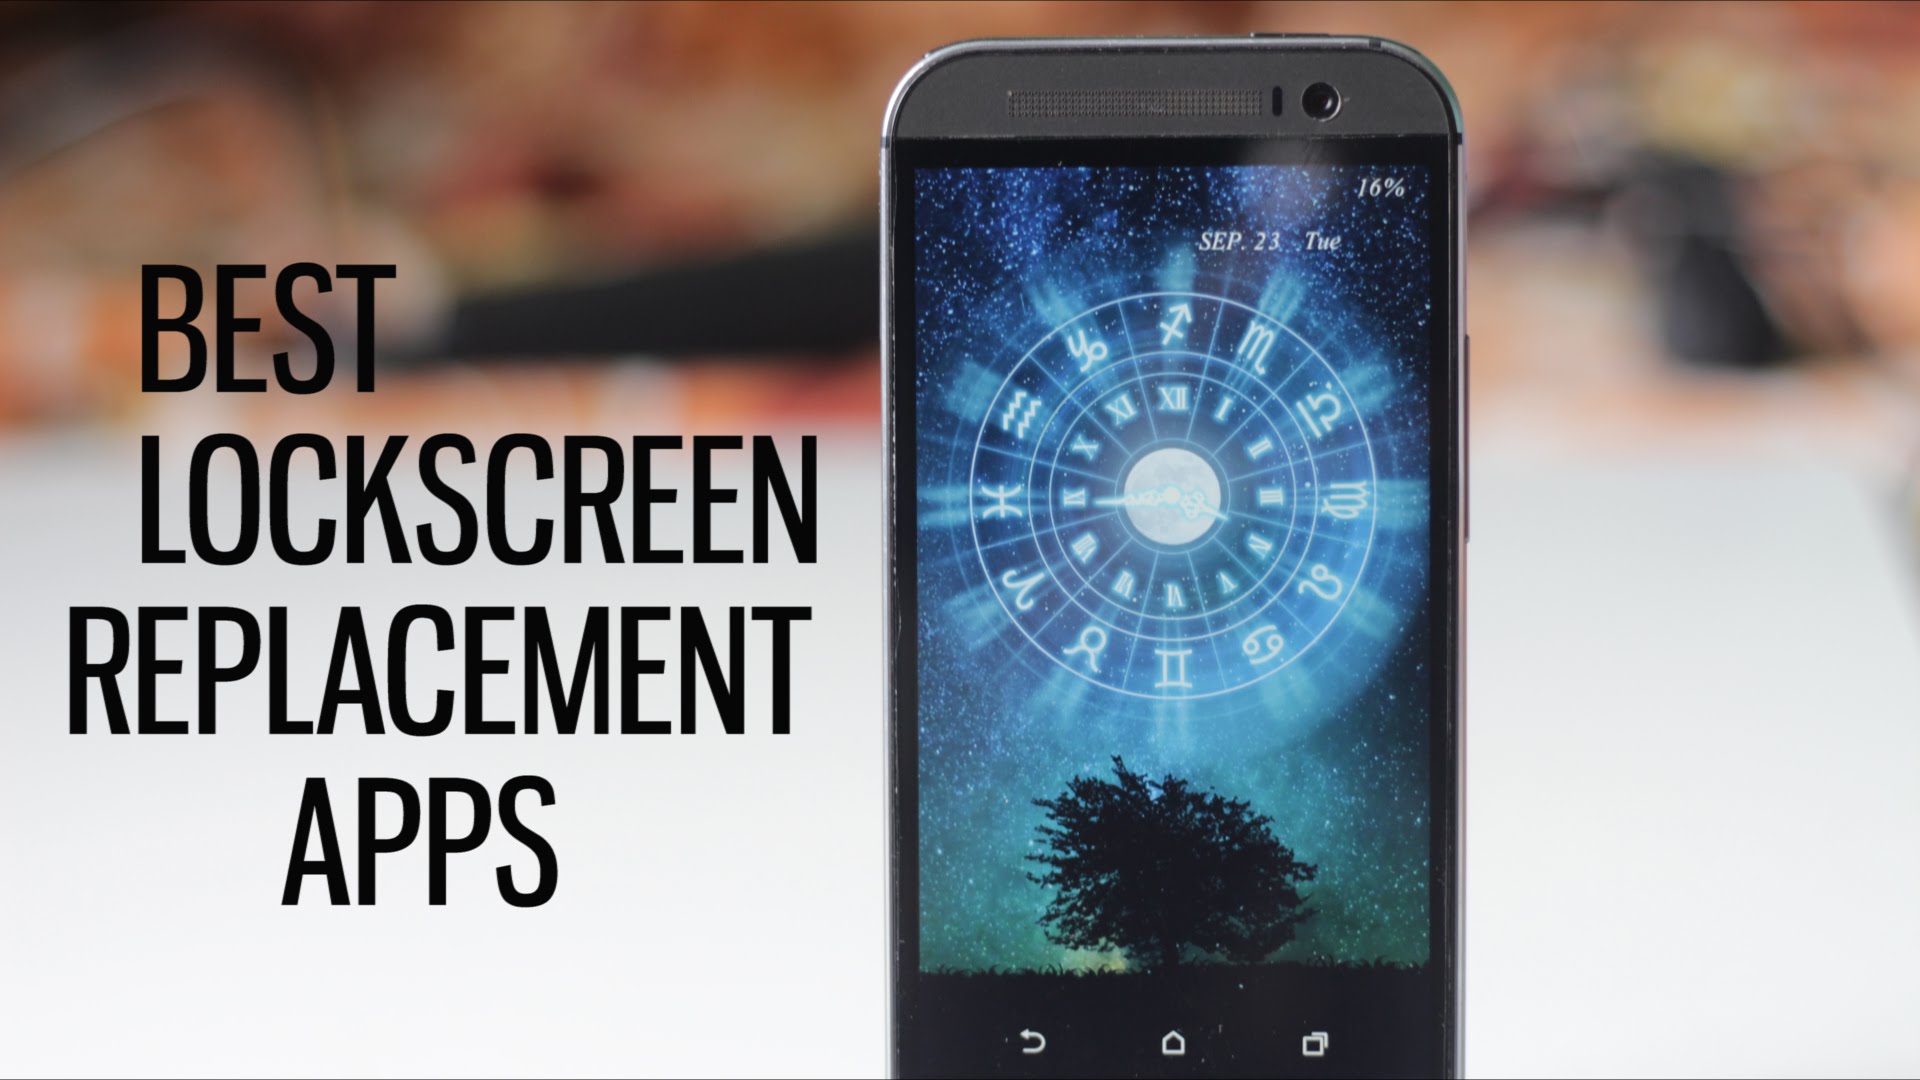 Top 5 Best Lockscreen Replacement Apps 2014 - Customize Your ...